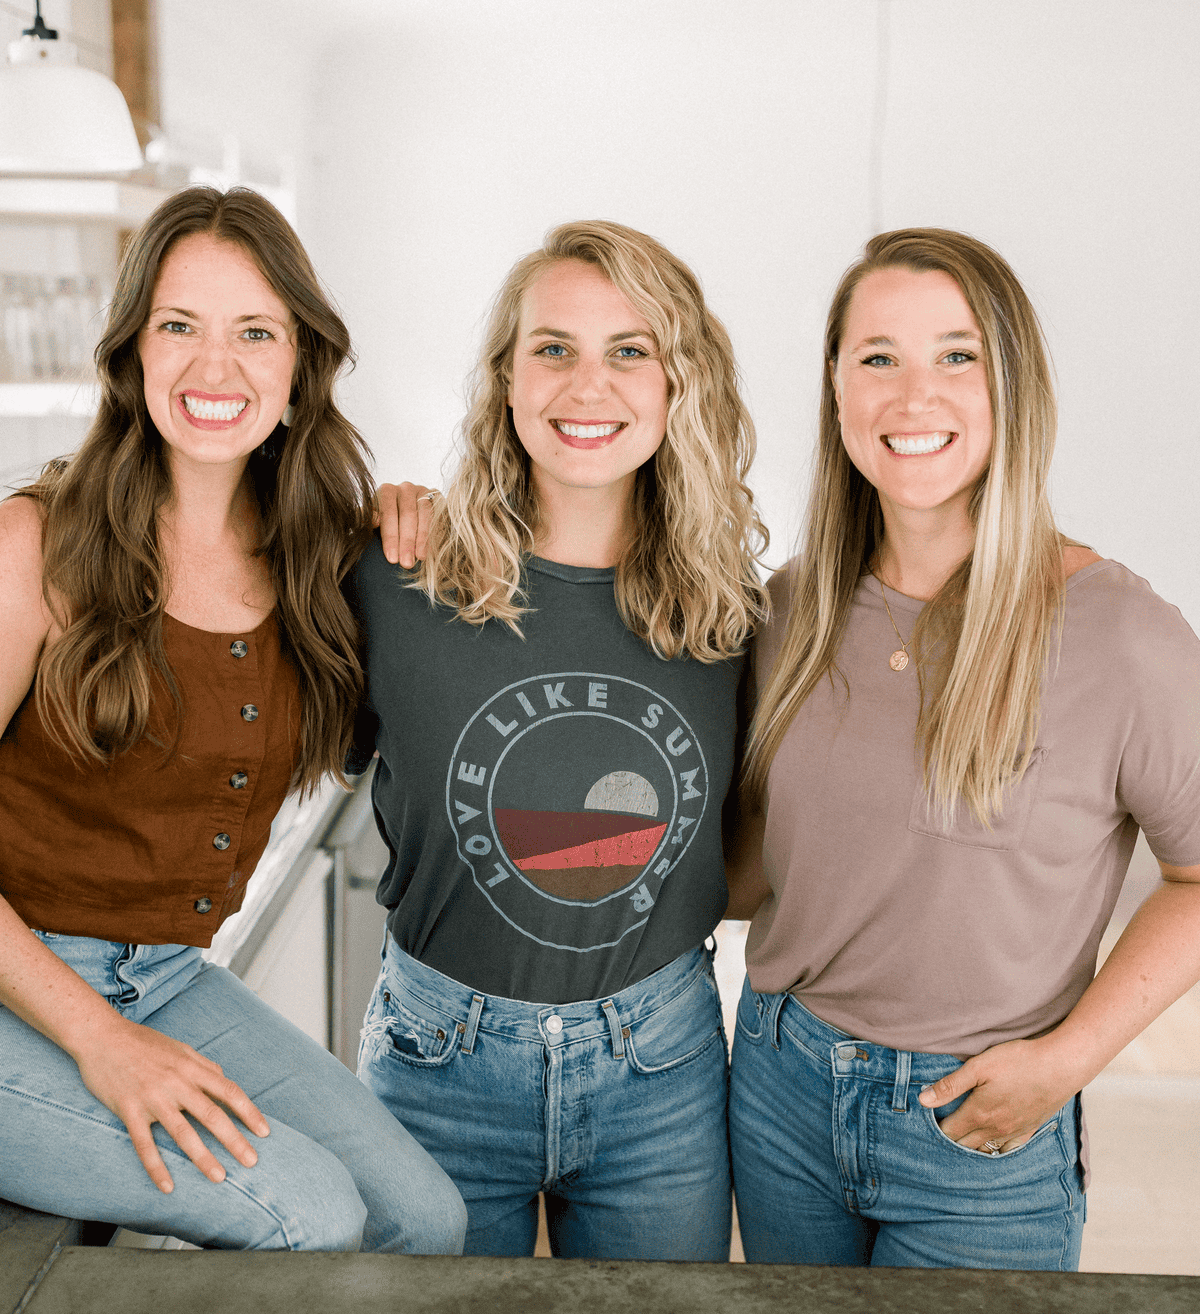 Three women, fit and radiant, stand closely together indoors, smiling at the camera. Each is dressed in casual wear, possibly sharing their latest foodie finds.